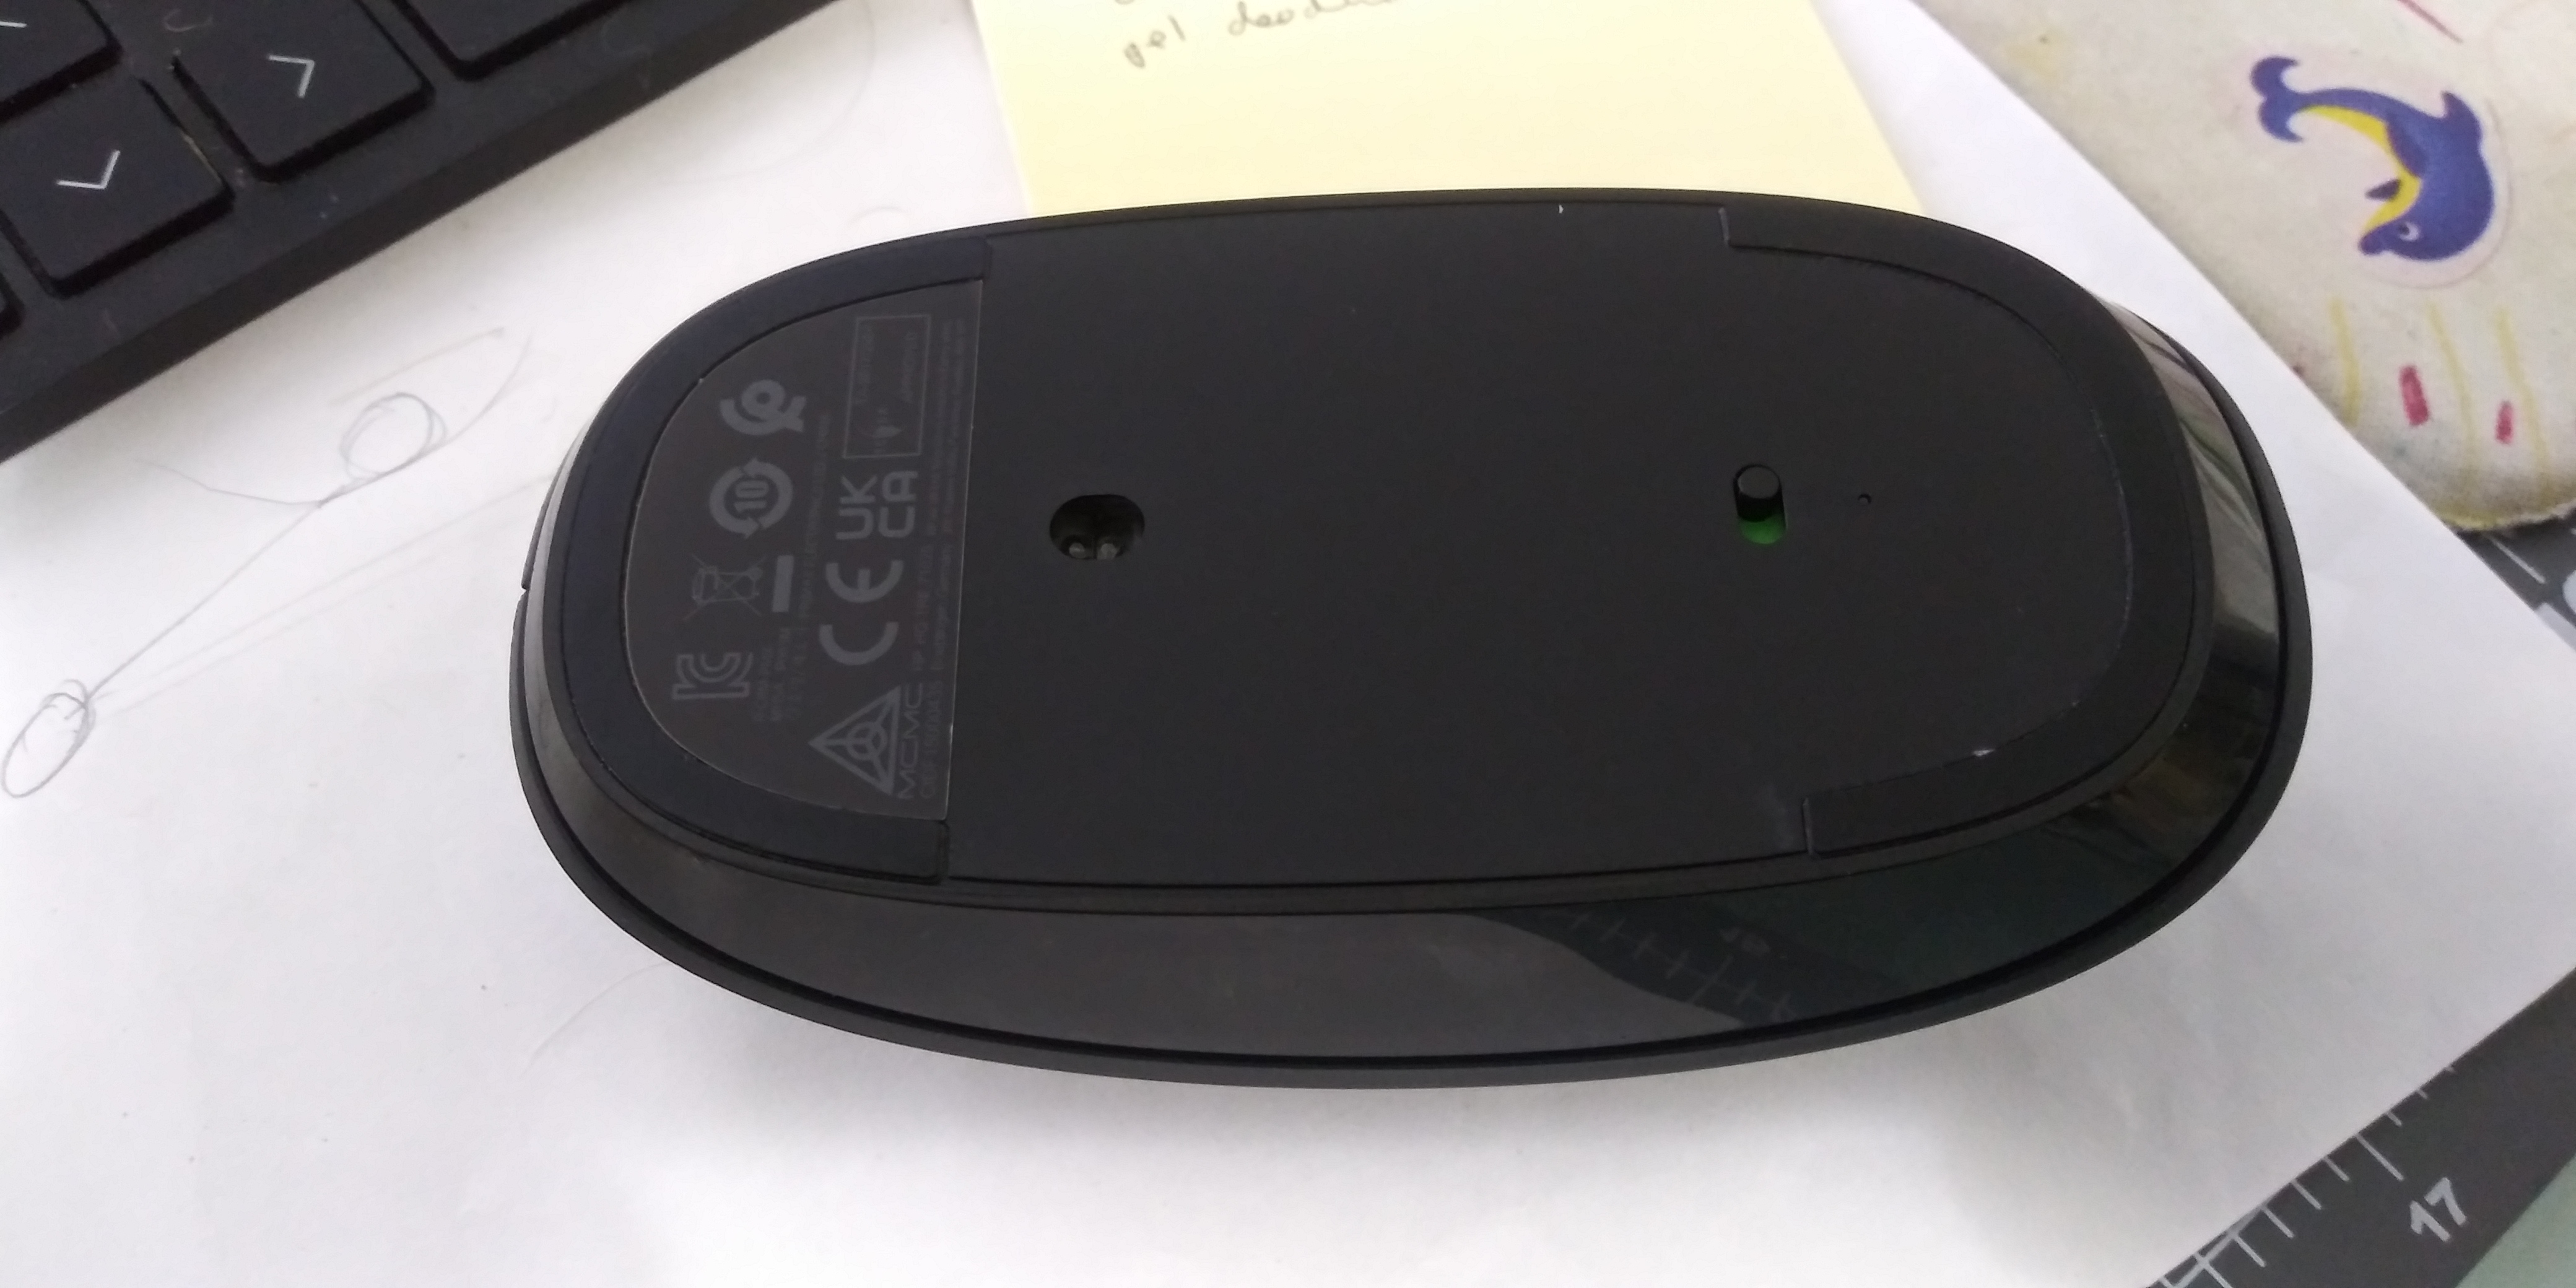 How do I open wireless mouse (model HP 230) - HP Support Community - 8566371